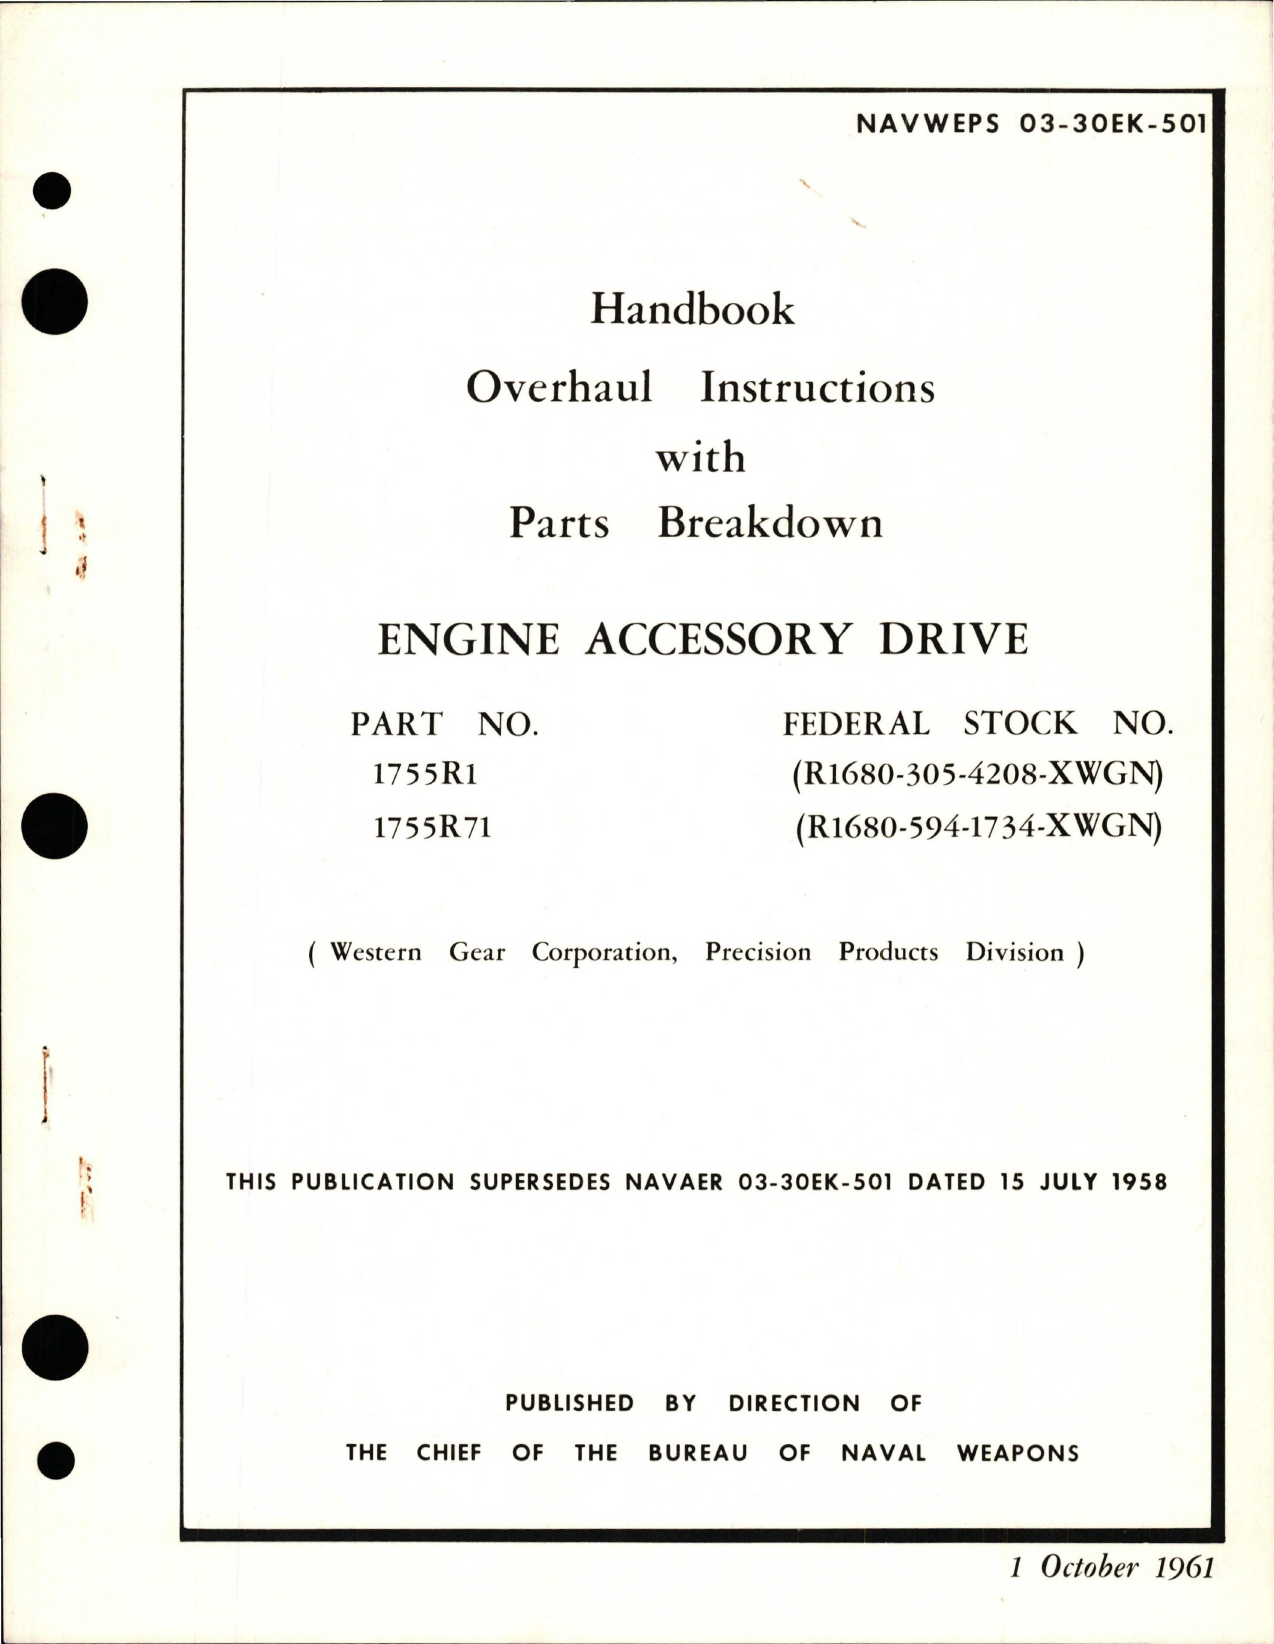 Sample page 1 from AirCorps Library document: Overhaul Instructions with Parts Breakdown for Engine Accessory Drive - Part 1755R1 and 1755R71